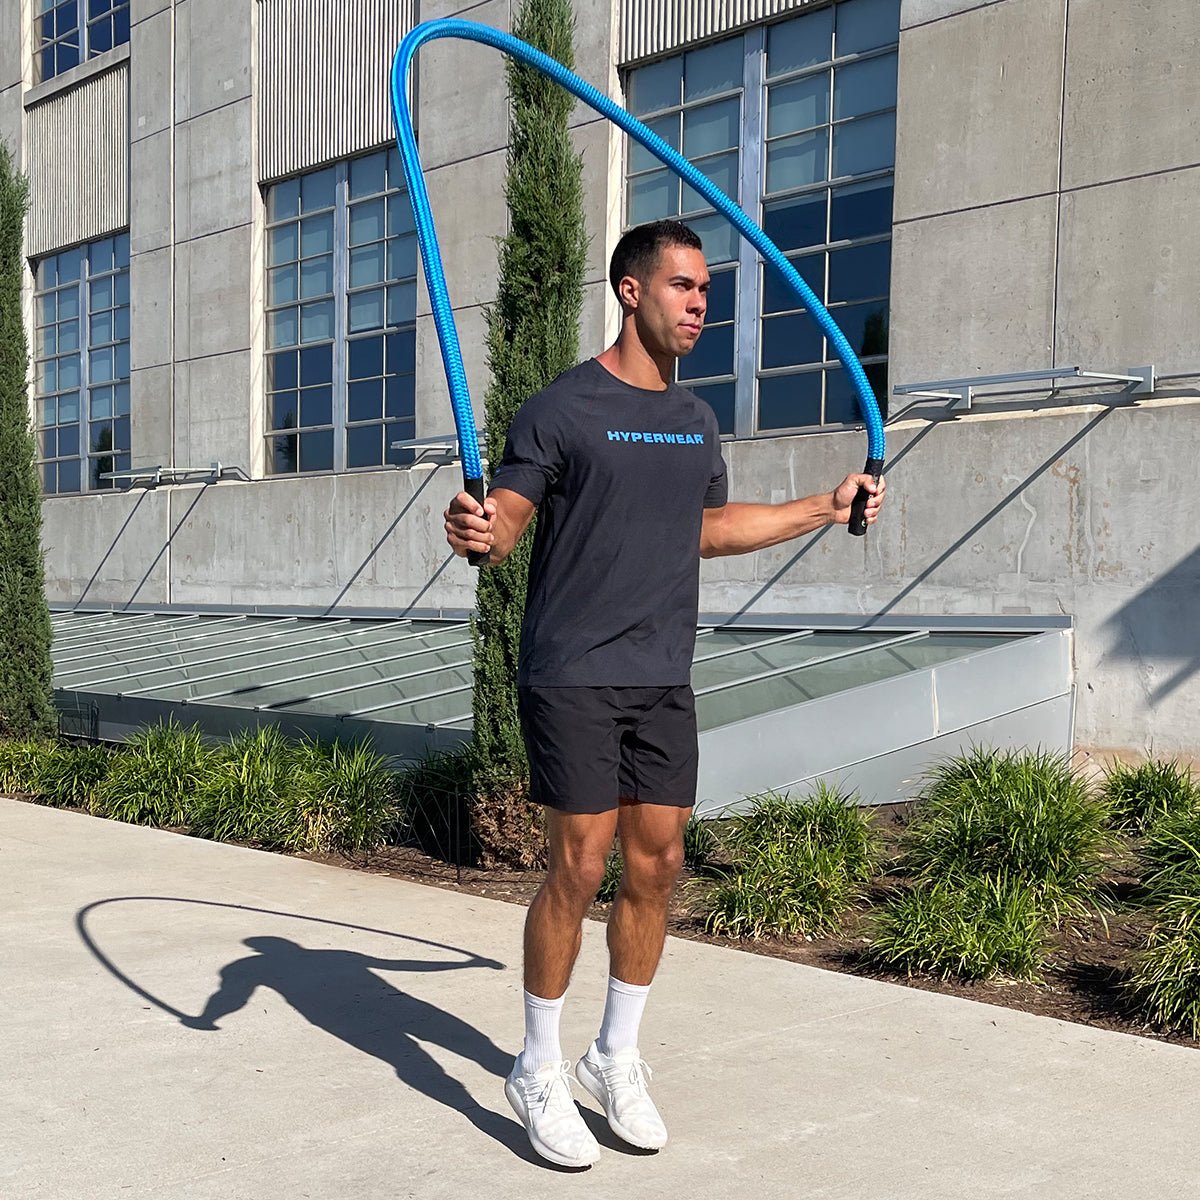 Weighted Jump Rope Benefits: Why You Should Add It To Your Workout - Hyperwear